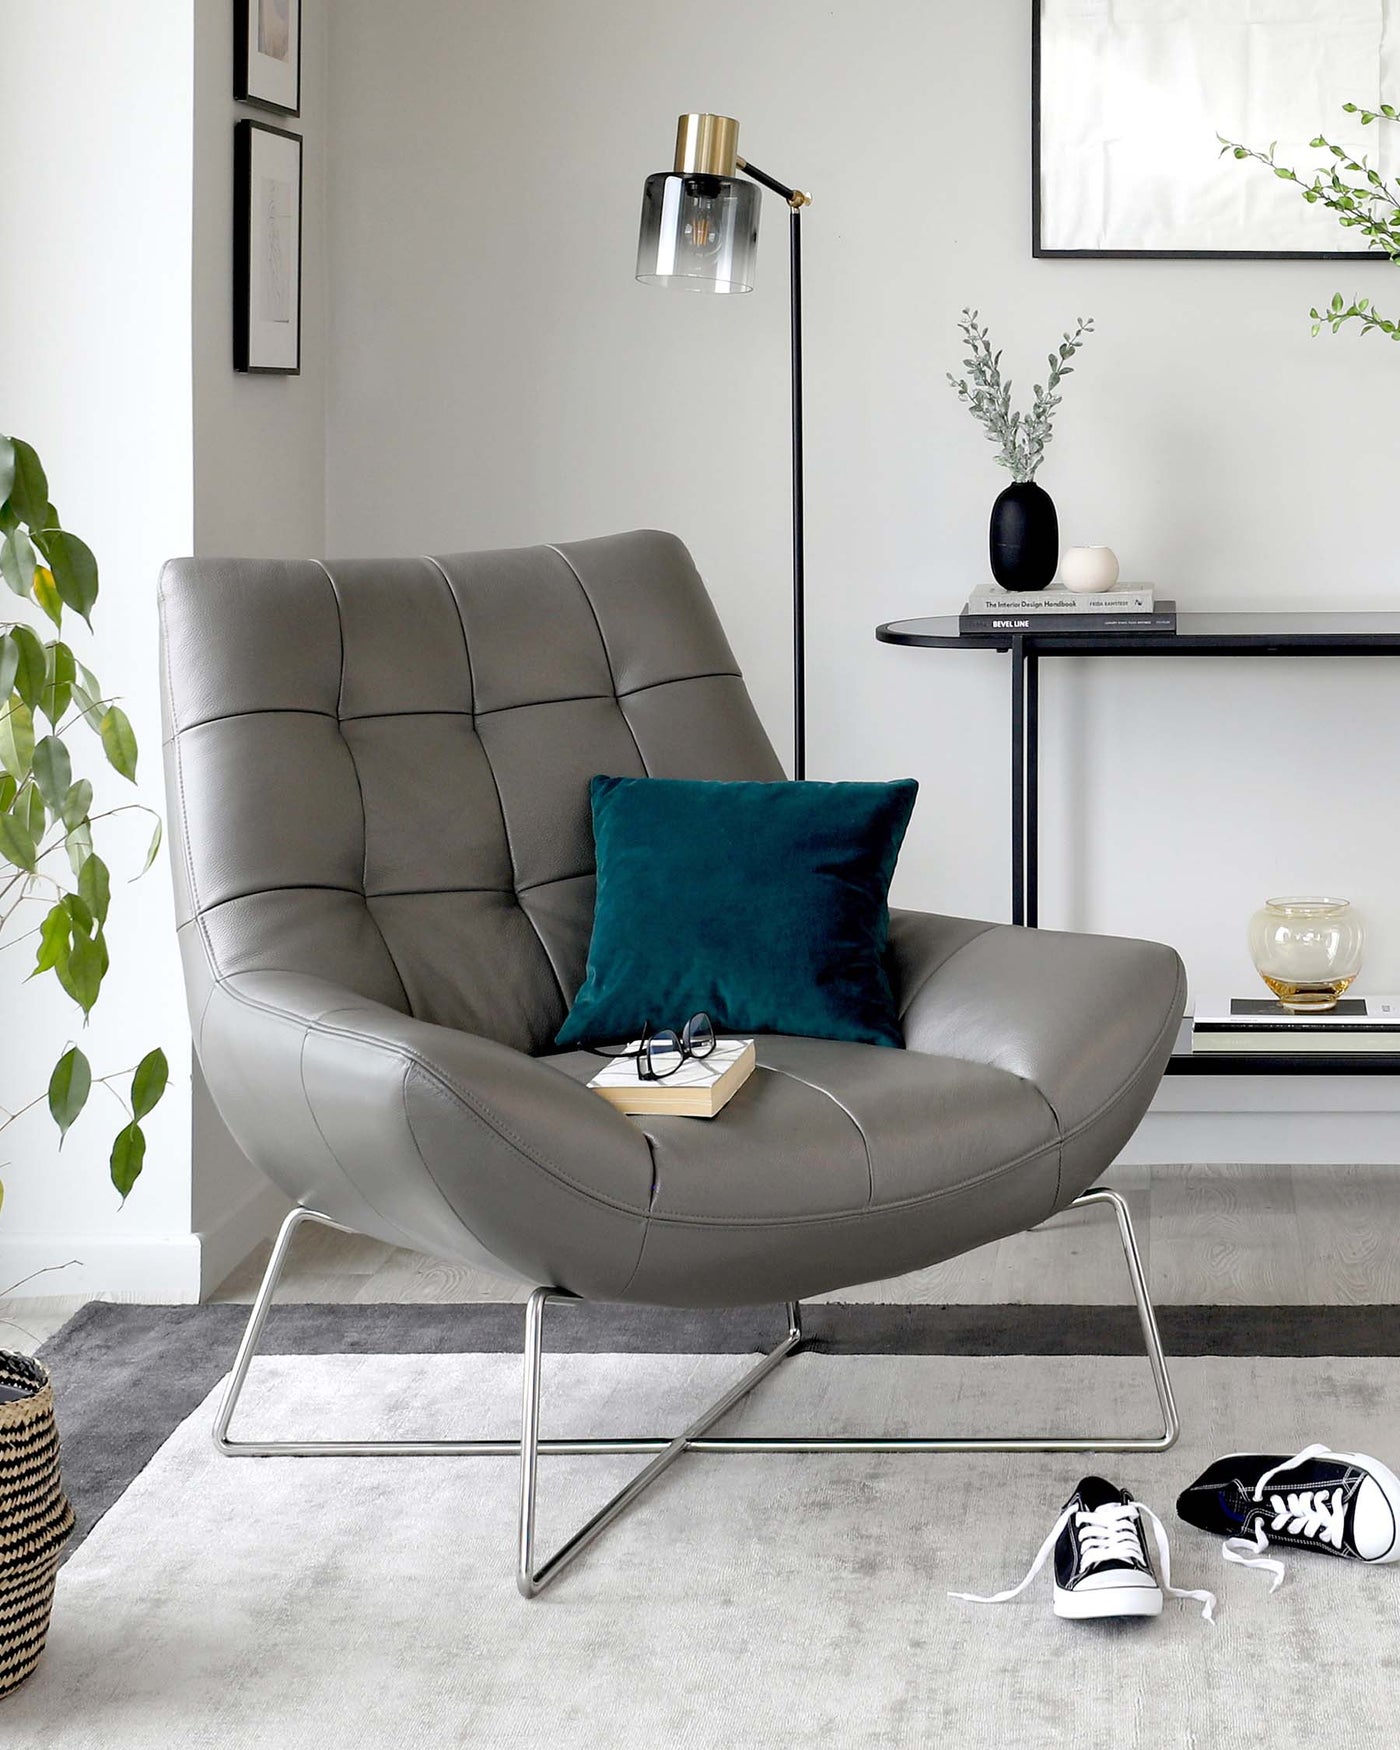 Modern grey leather upholstered lounge chair with tufted backrest and cushioned seat, supported by a sleek, chrome-finished metal frame with cantilever base. Beside it is a stylish black floor lamp with a gold accent and a glass shade, alongside a minimalist black console table holding decorative items.